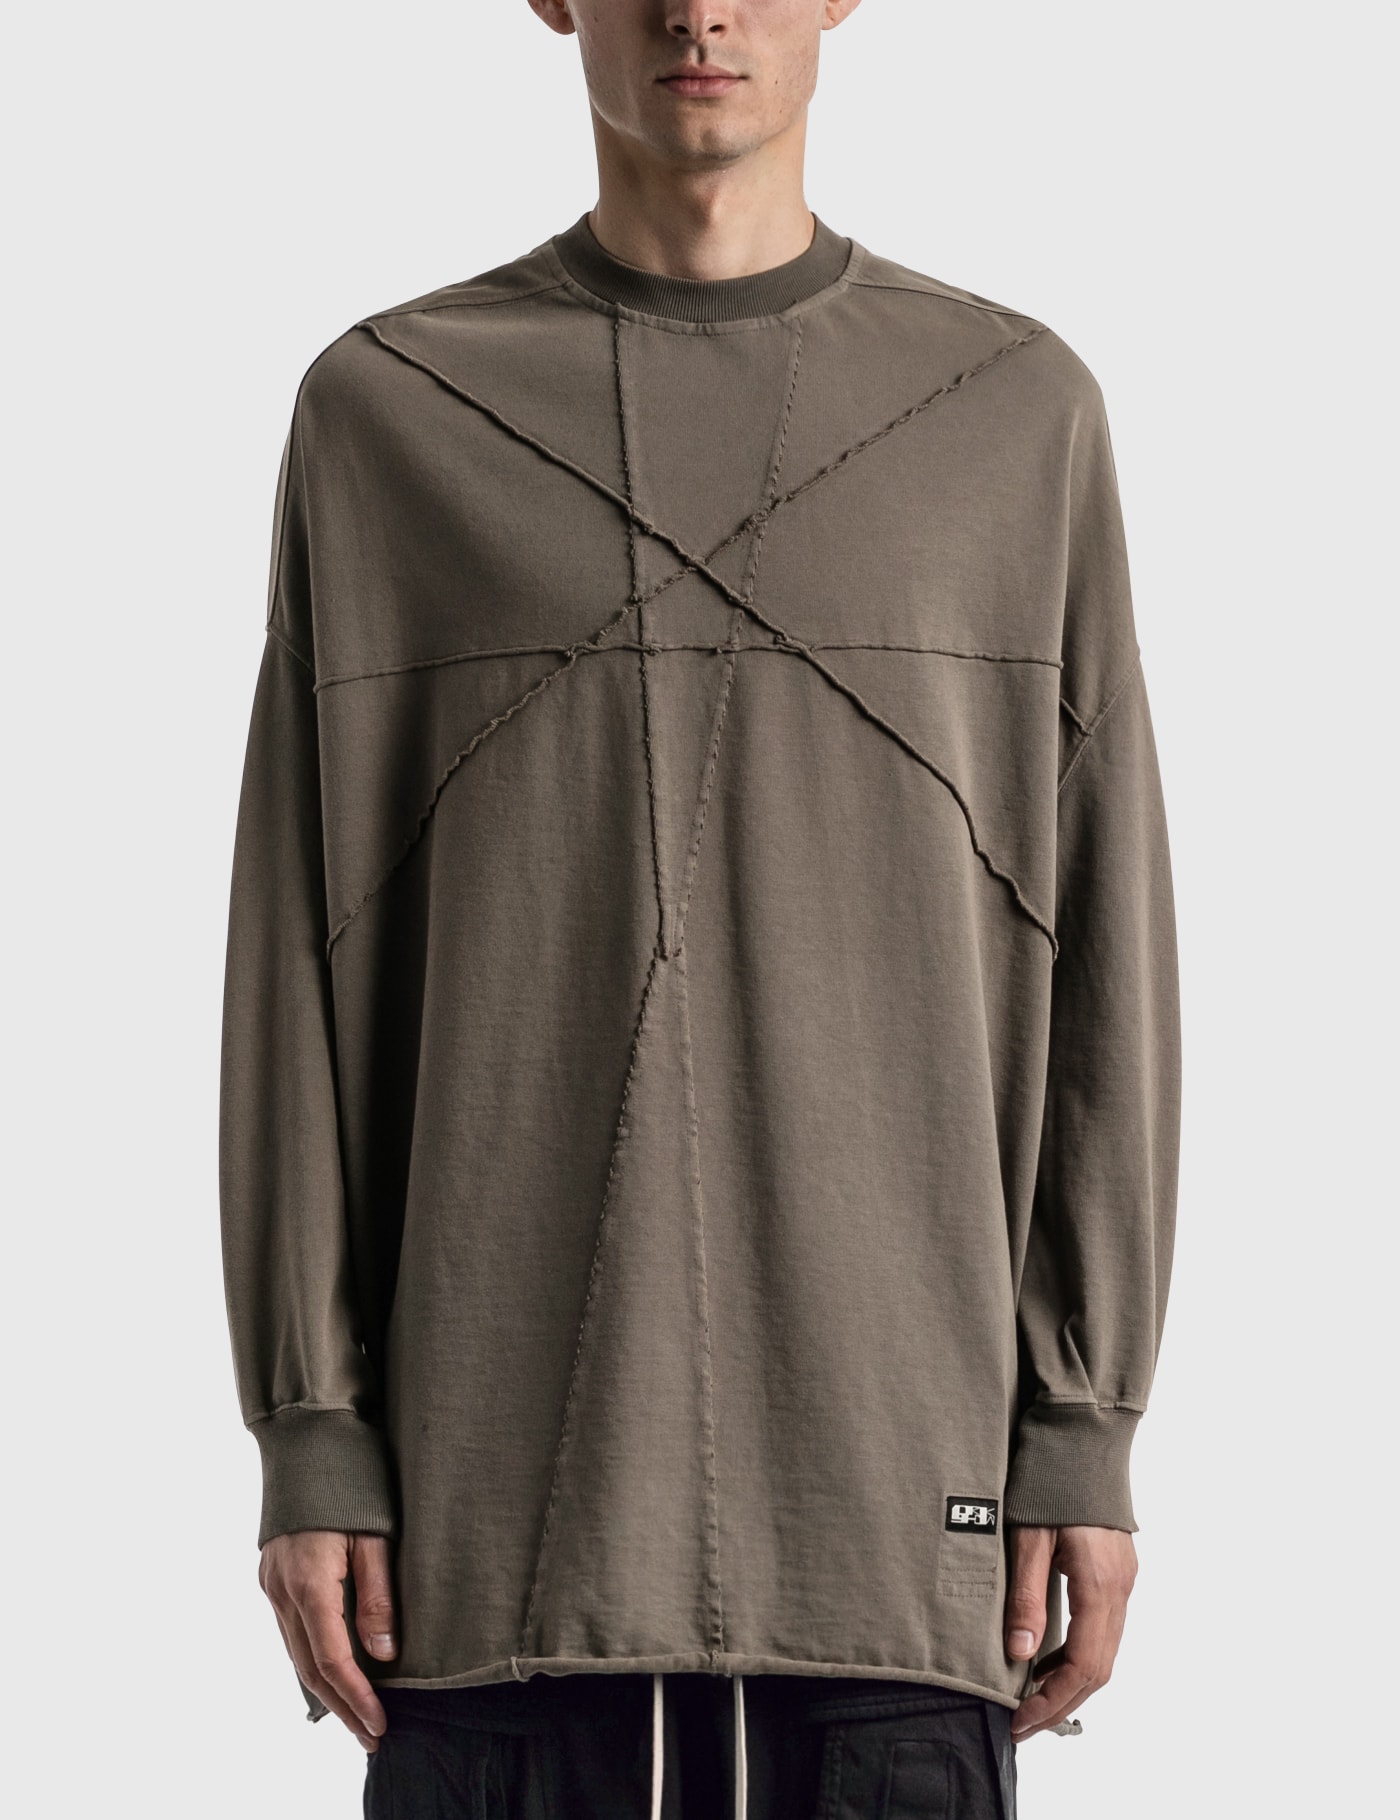 RICK OWENS DRKSHDW CRATER TUNIC SWEATER